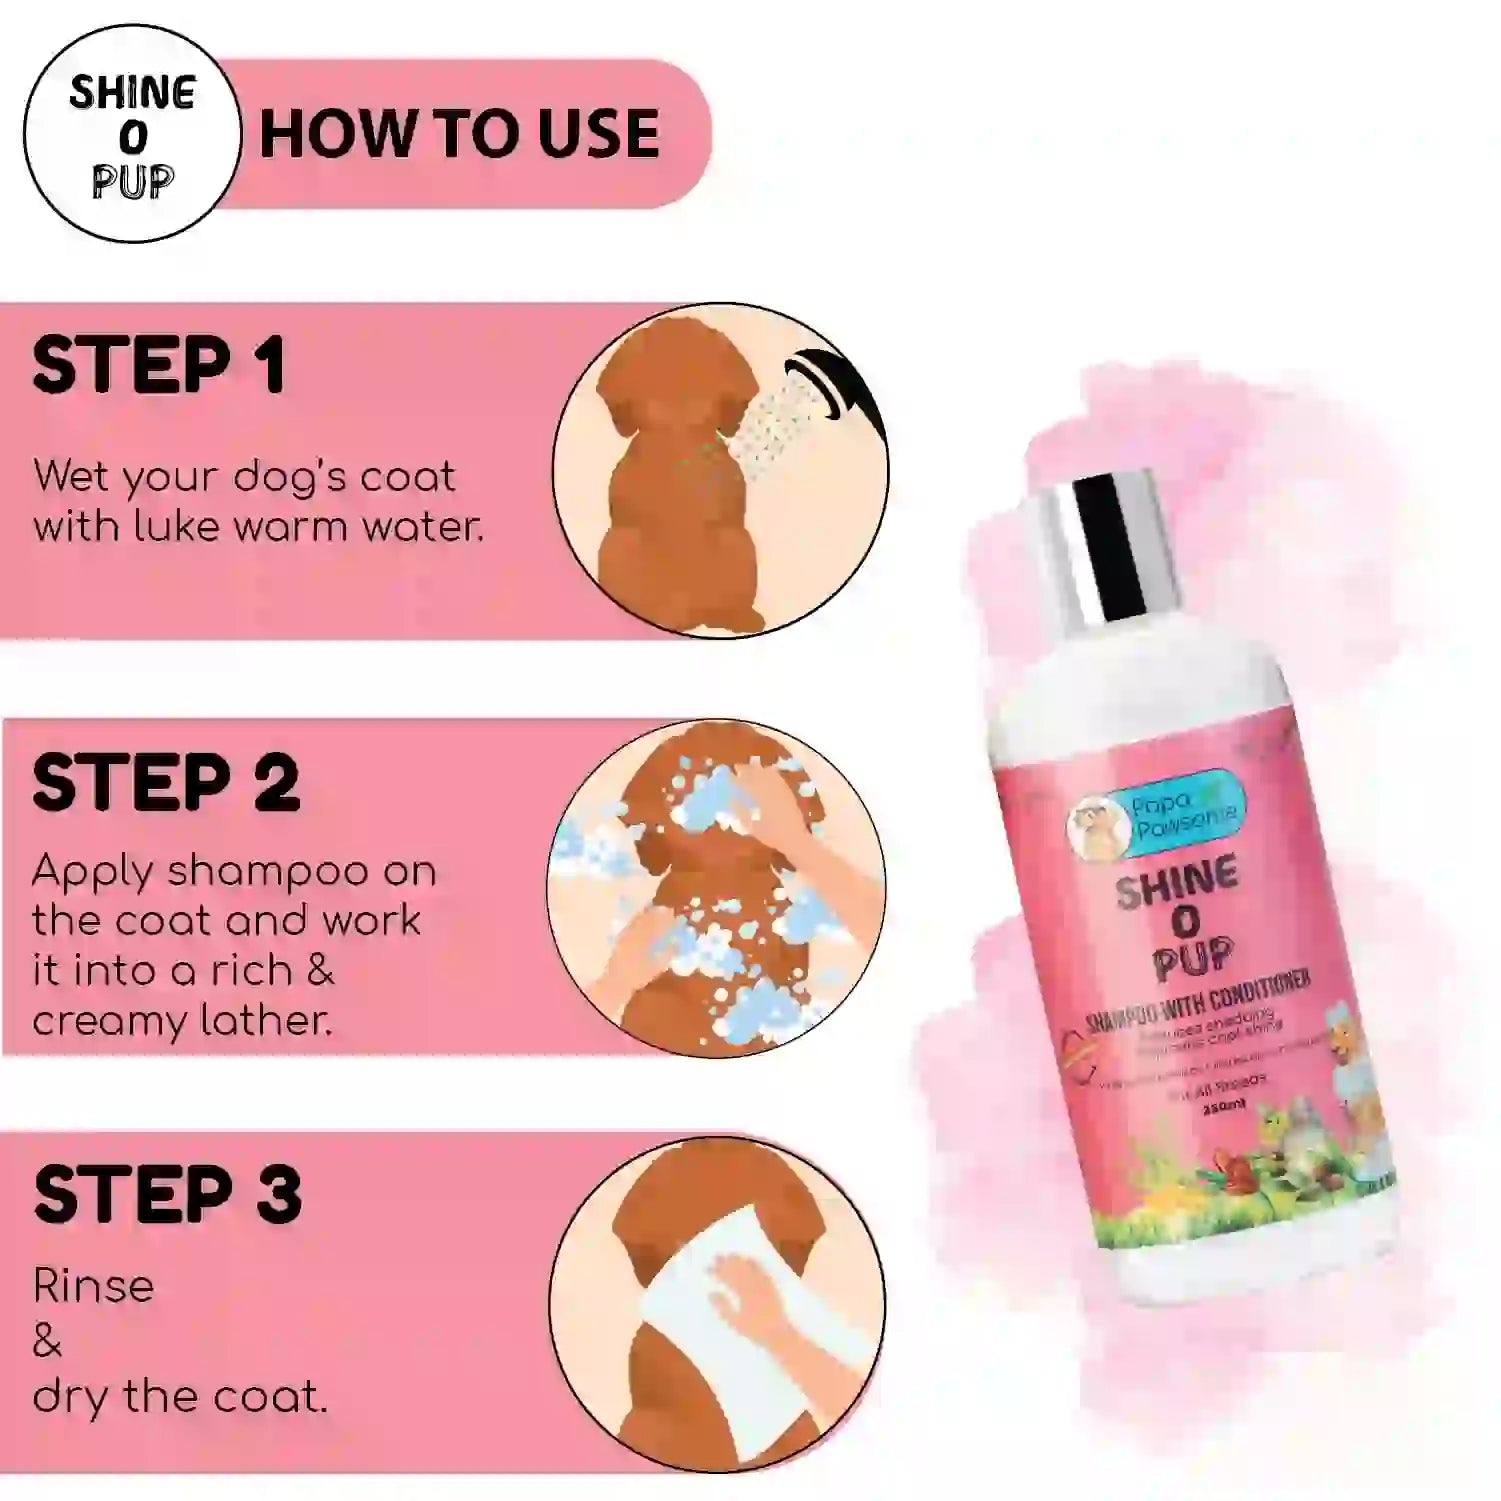 Shampoo application instructions: Wet your dog's coat with lukewarm water, apply shampoo on the coat, work it into a rich lather, rinse, and dry the coat.